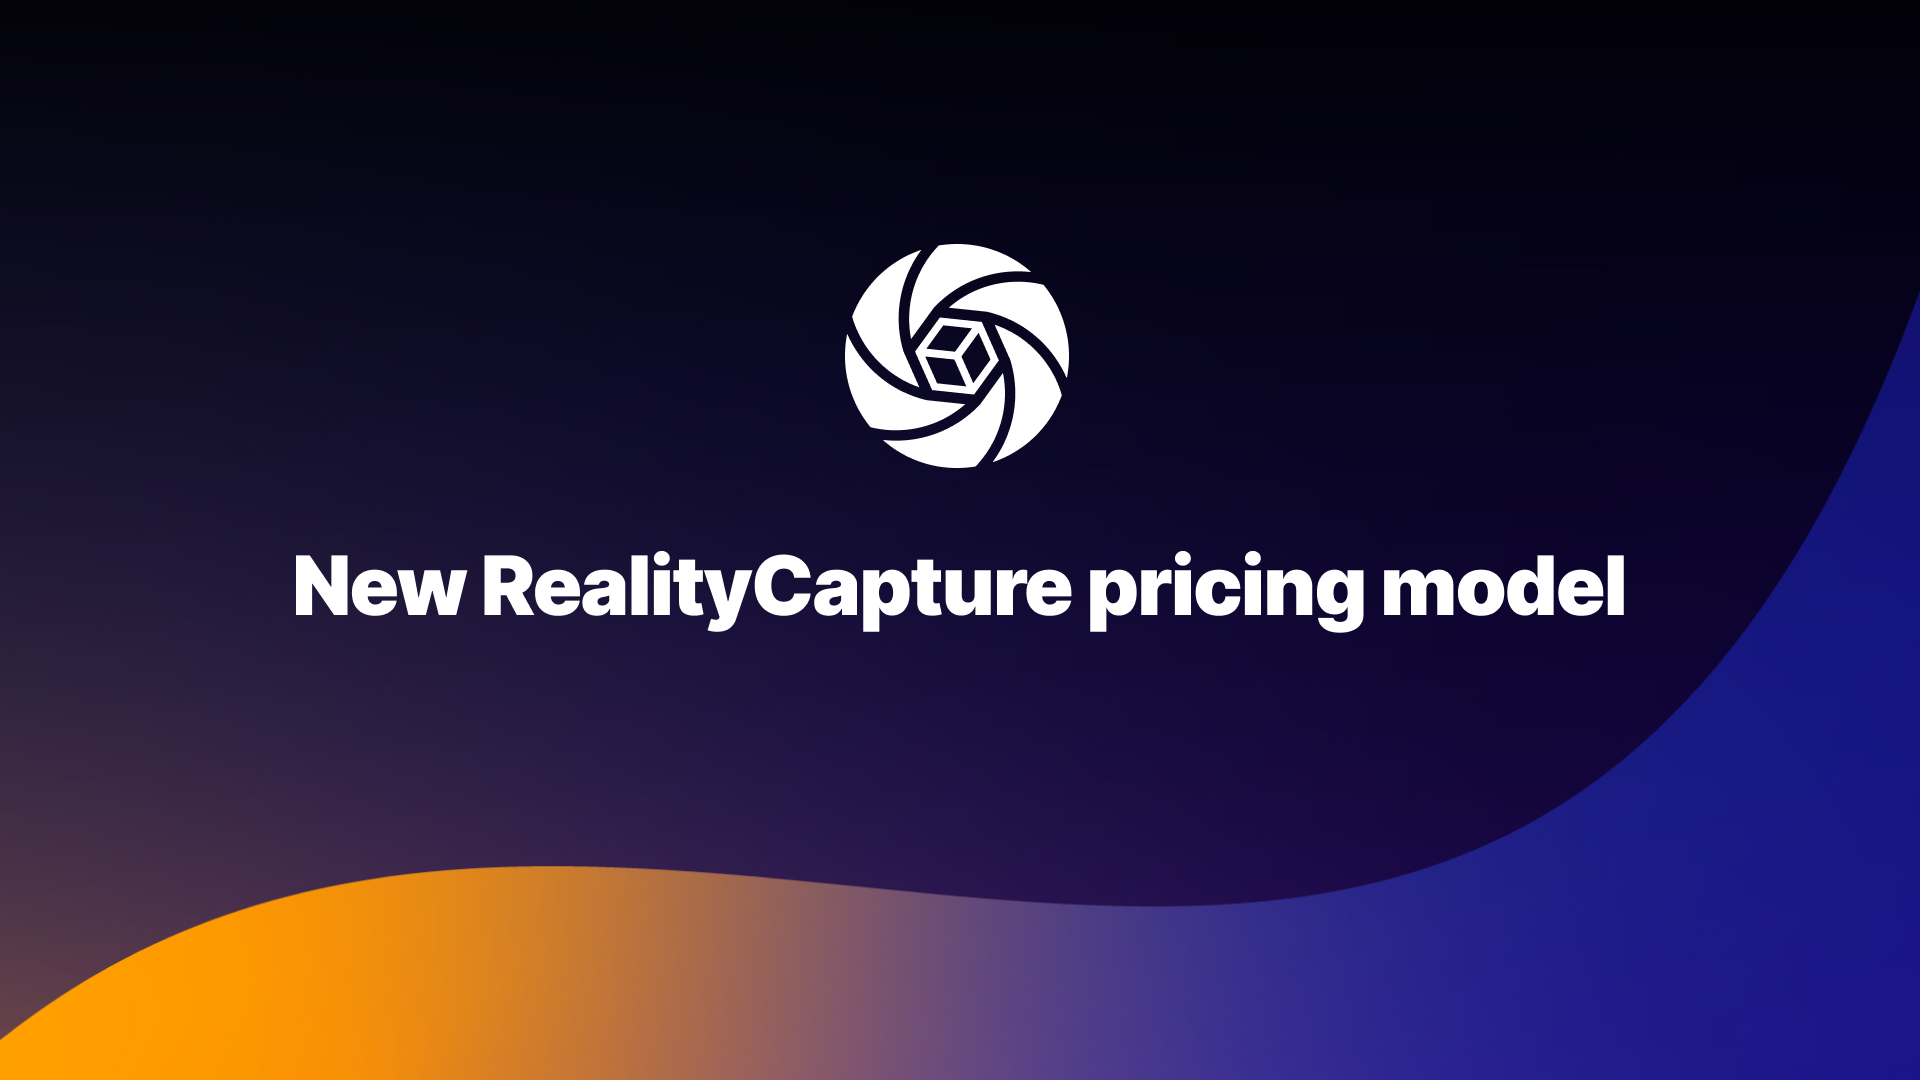 New RealityCapture Pricing Model